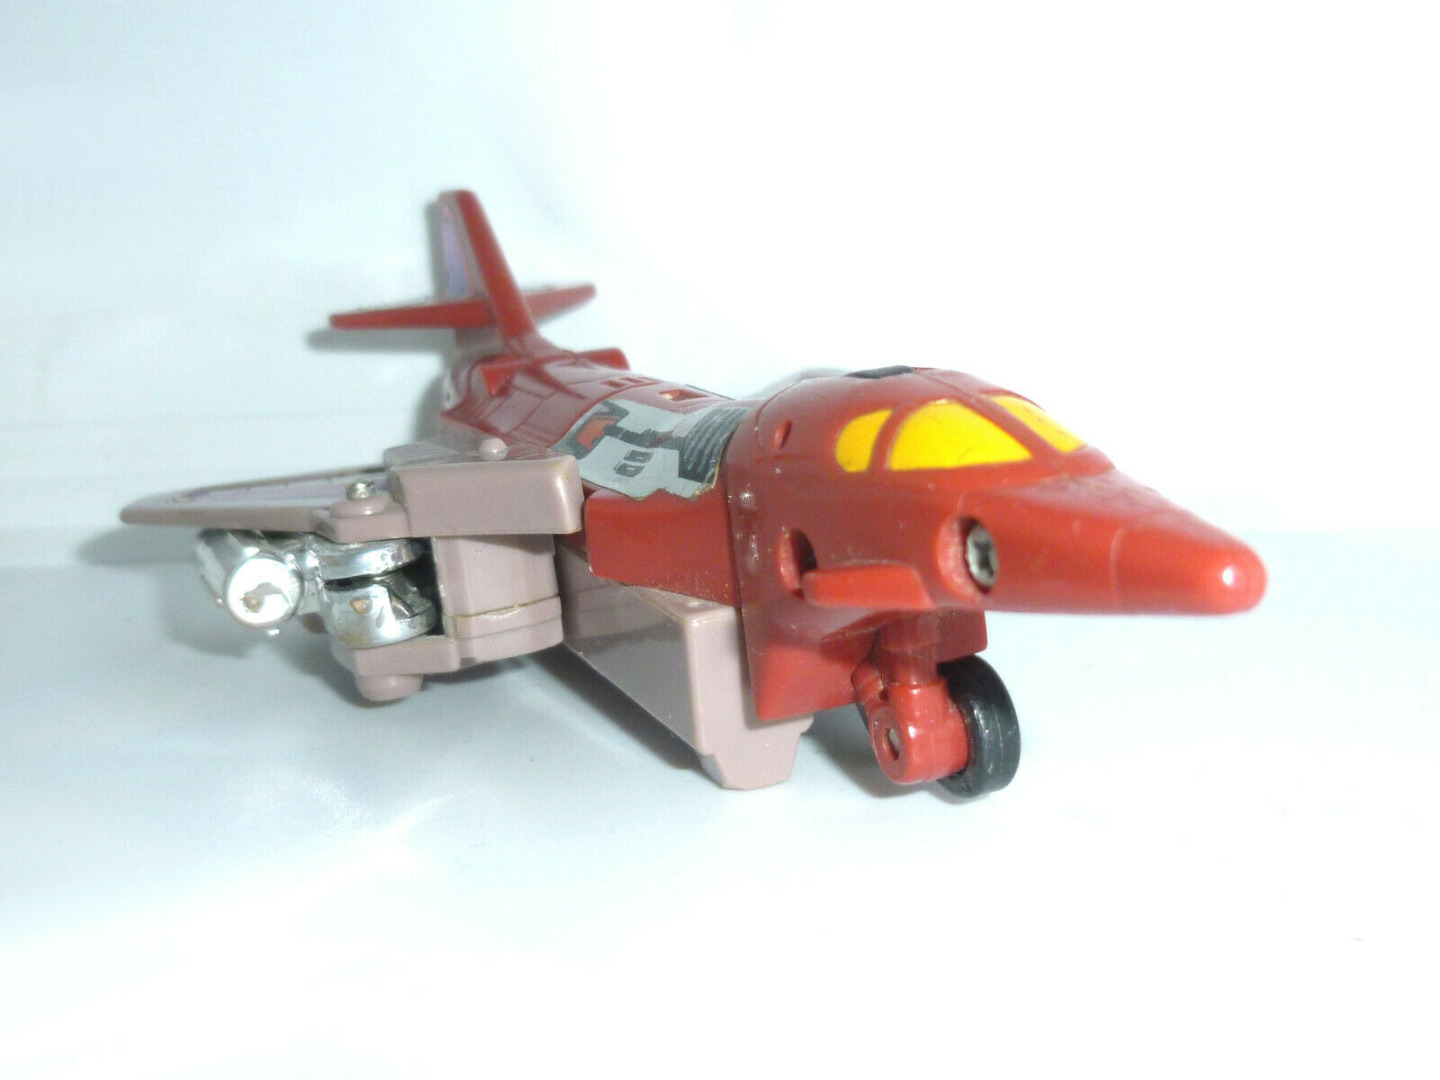 Transformers - Windsweeper - Kampfjet - Hasbro 1988 G1 Triggerbots and Triggercons 3